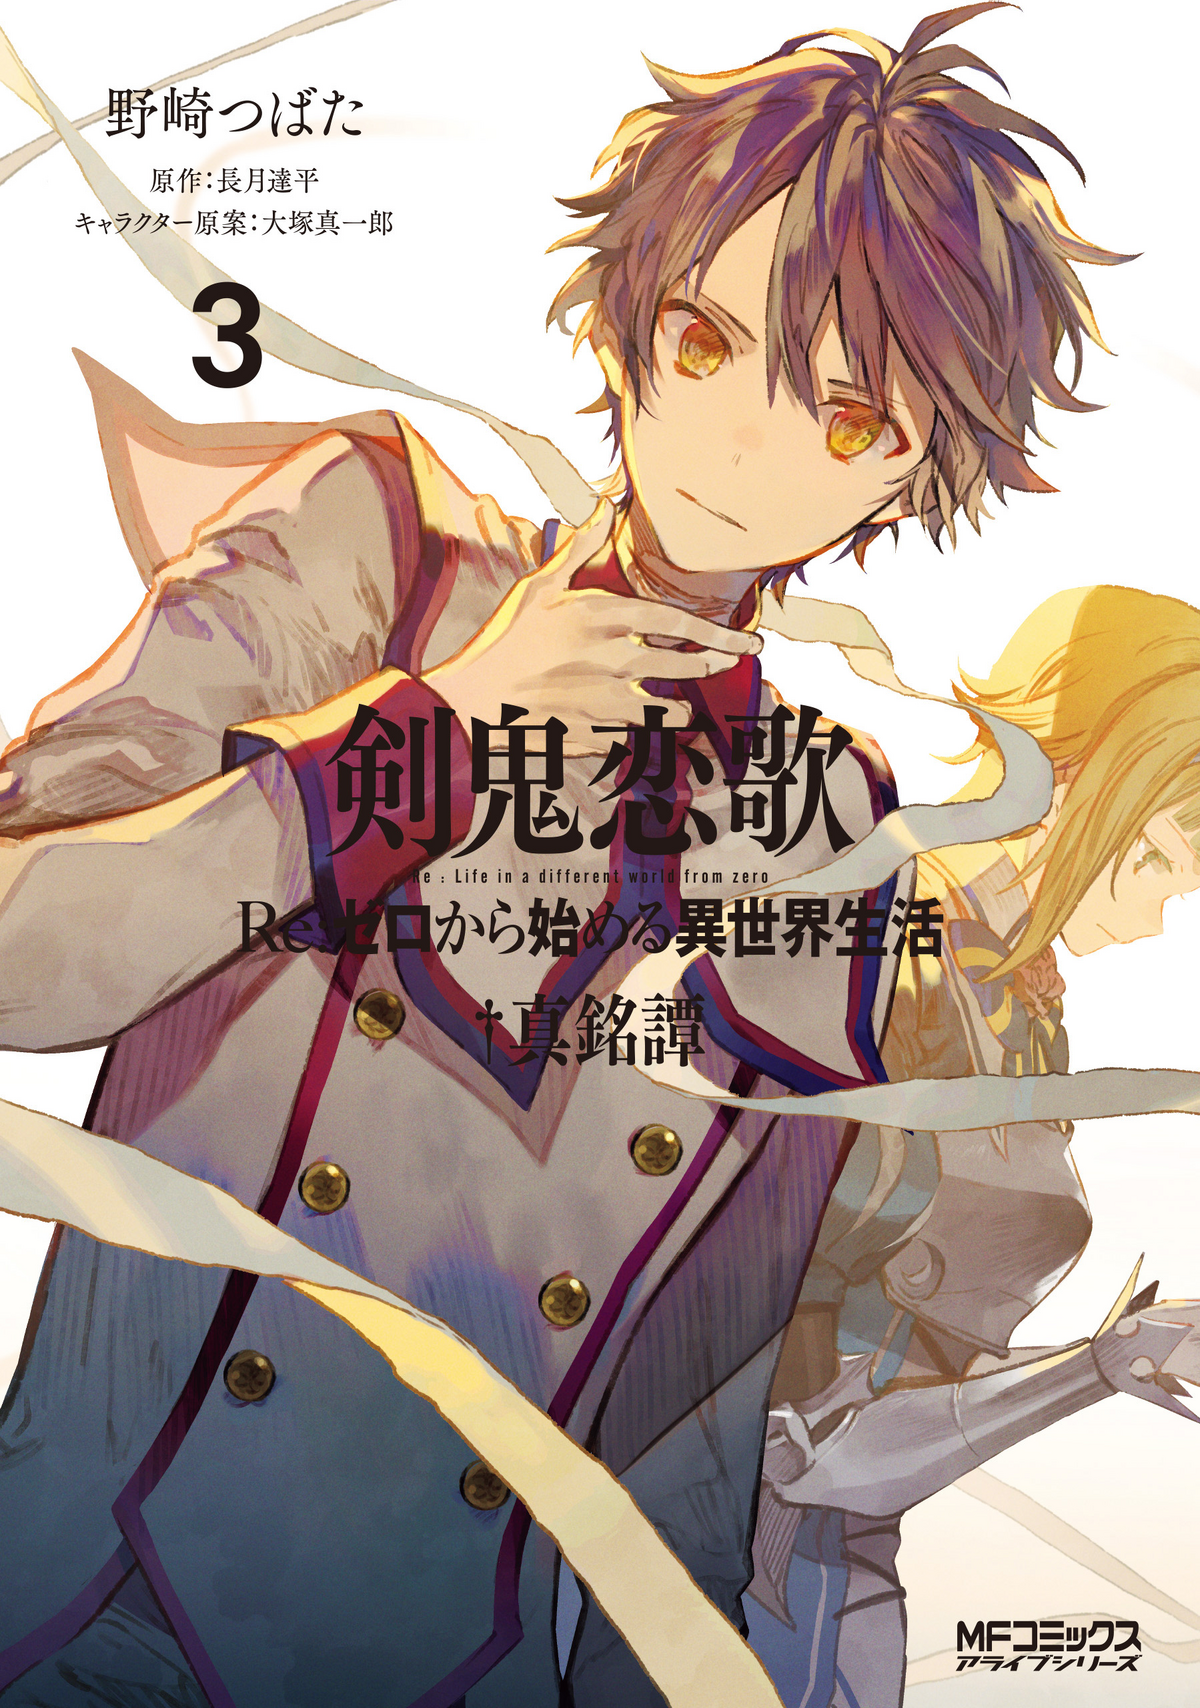 Re:ZERO, Vol. 1 - manga: -Starting Life in Another World- (Re:ZERO  -Starting Life in Another World-, Chapter 1: A Day in the Capital Manga, 1)